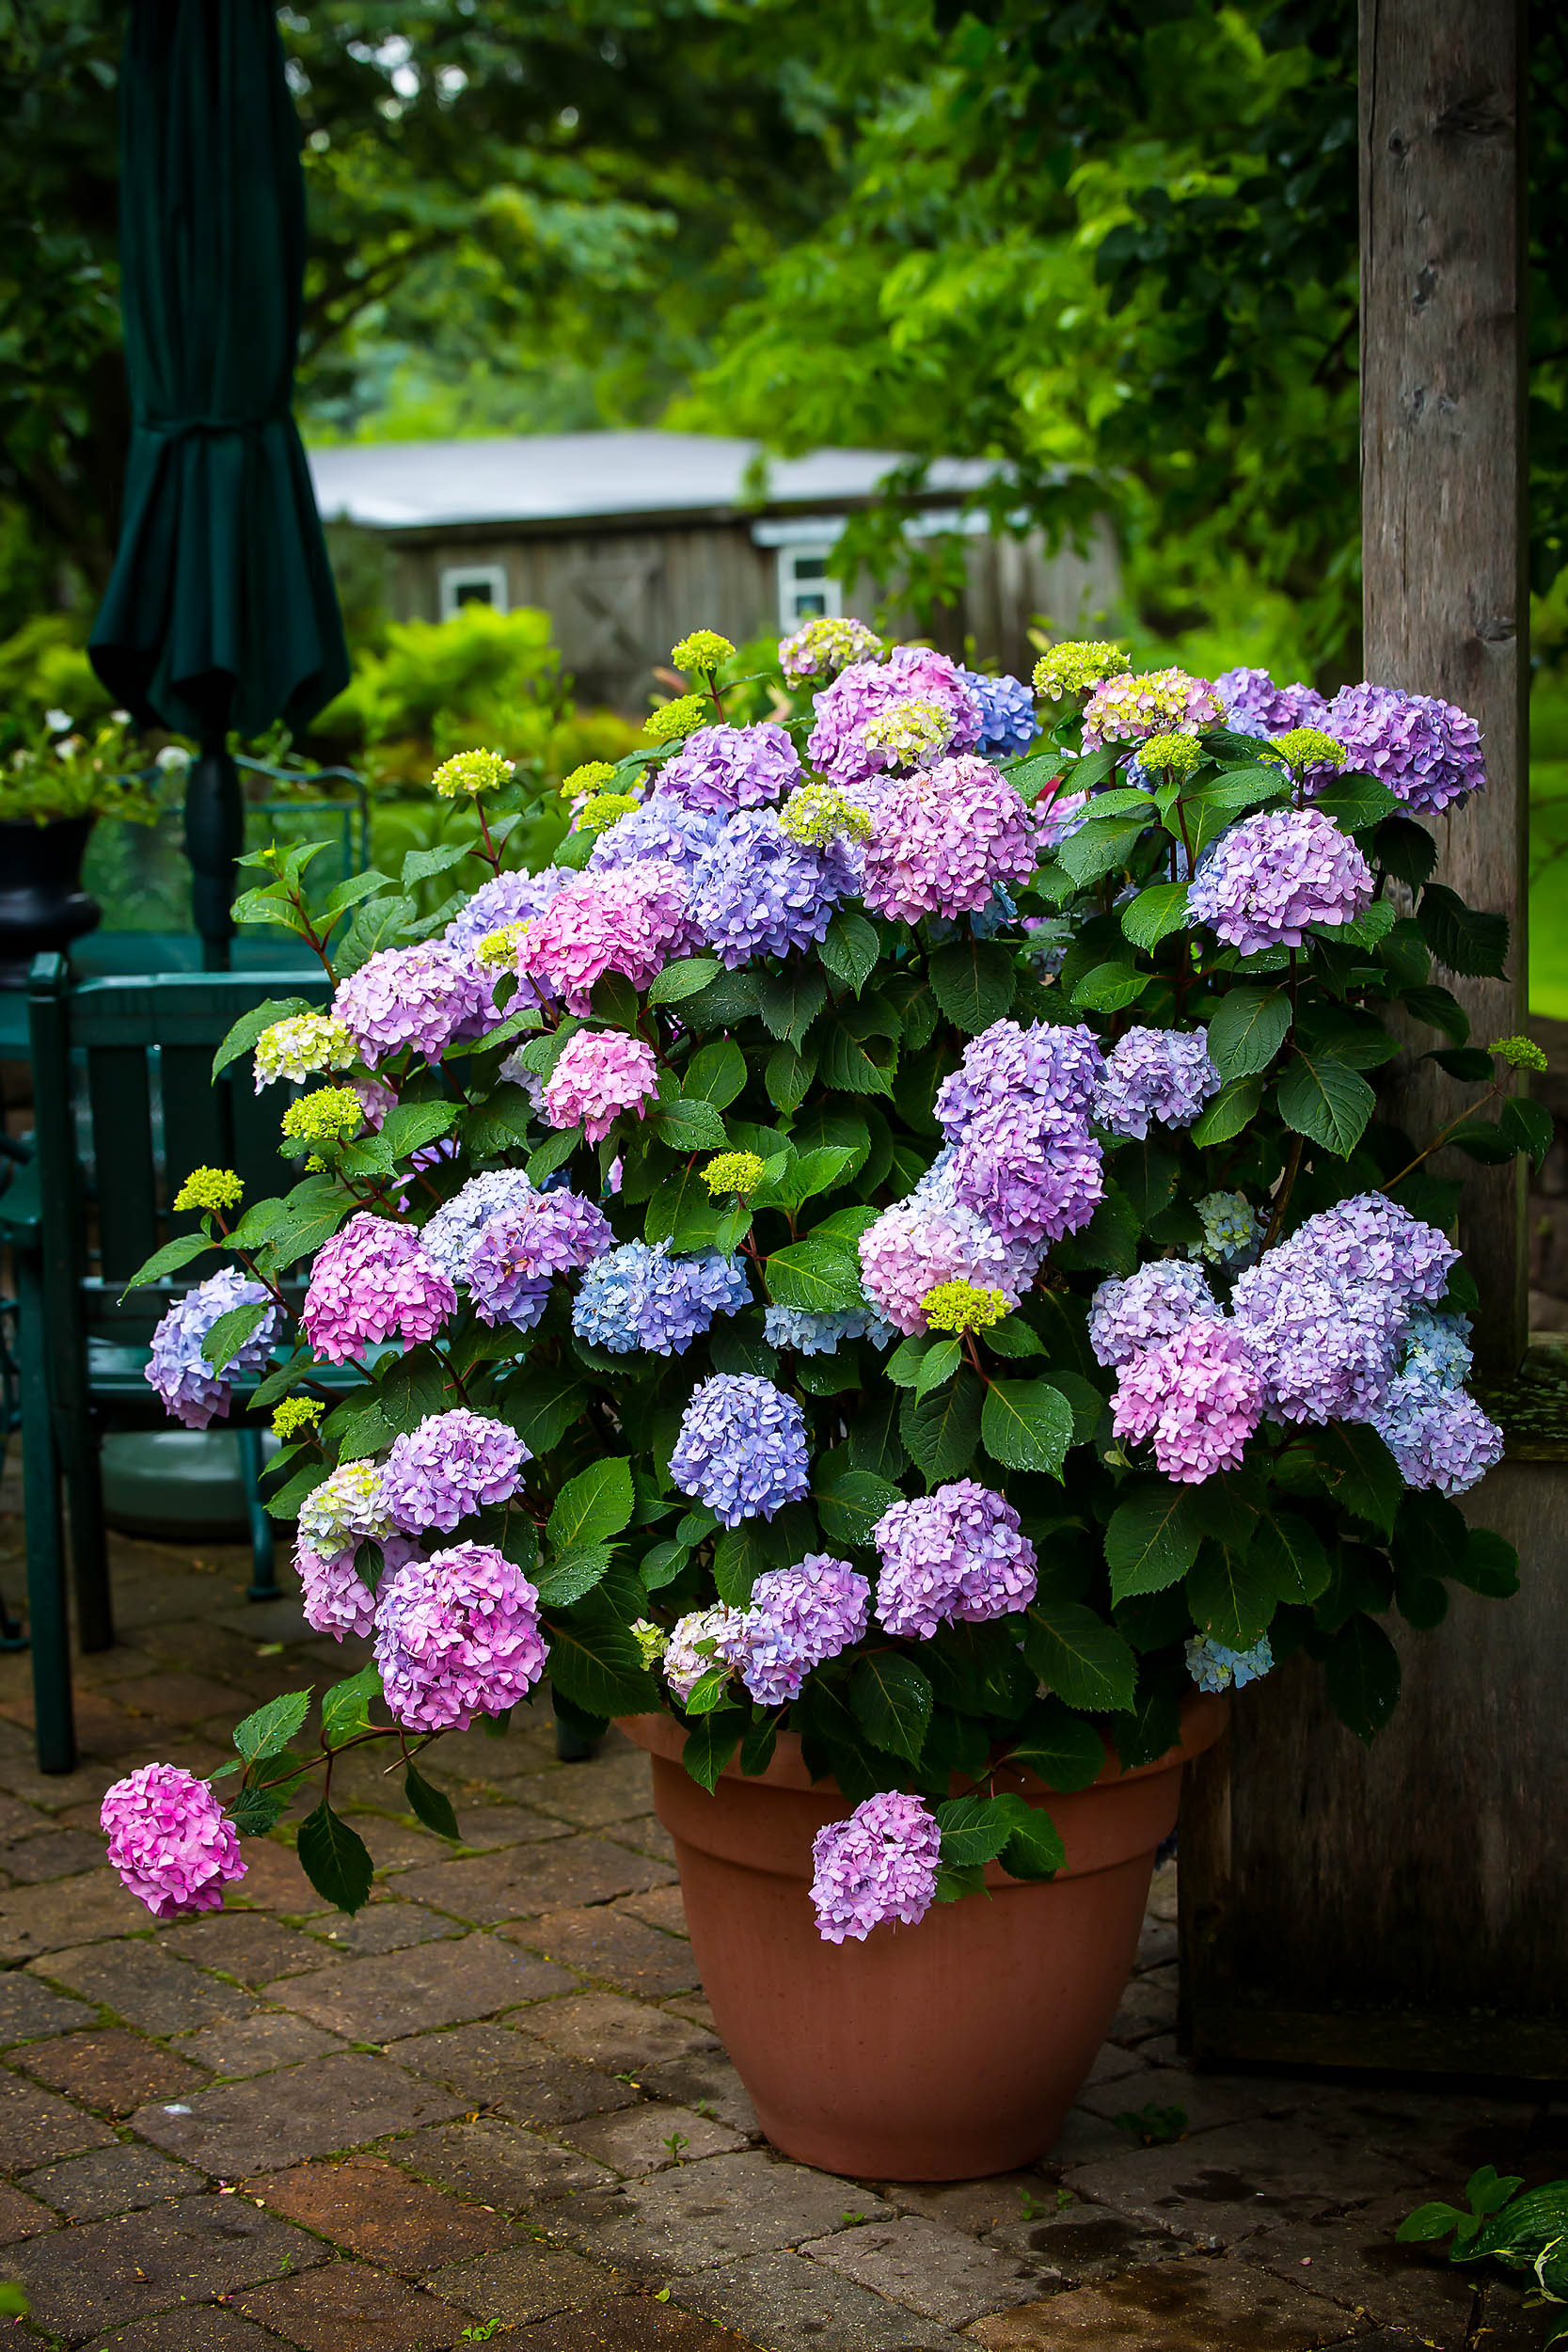 Bloomstruck Hydrangeas For Sale Online The Tree Center,Gin Rickey Recipe